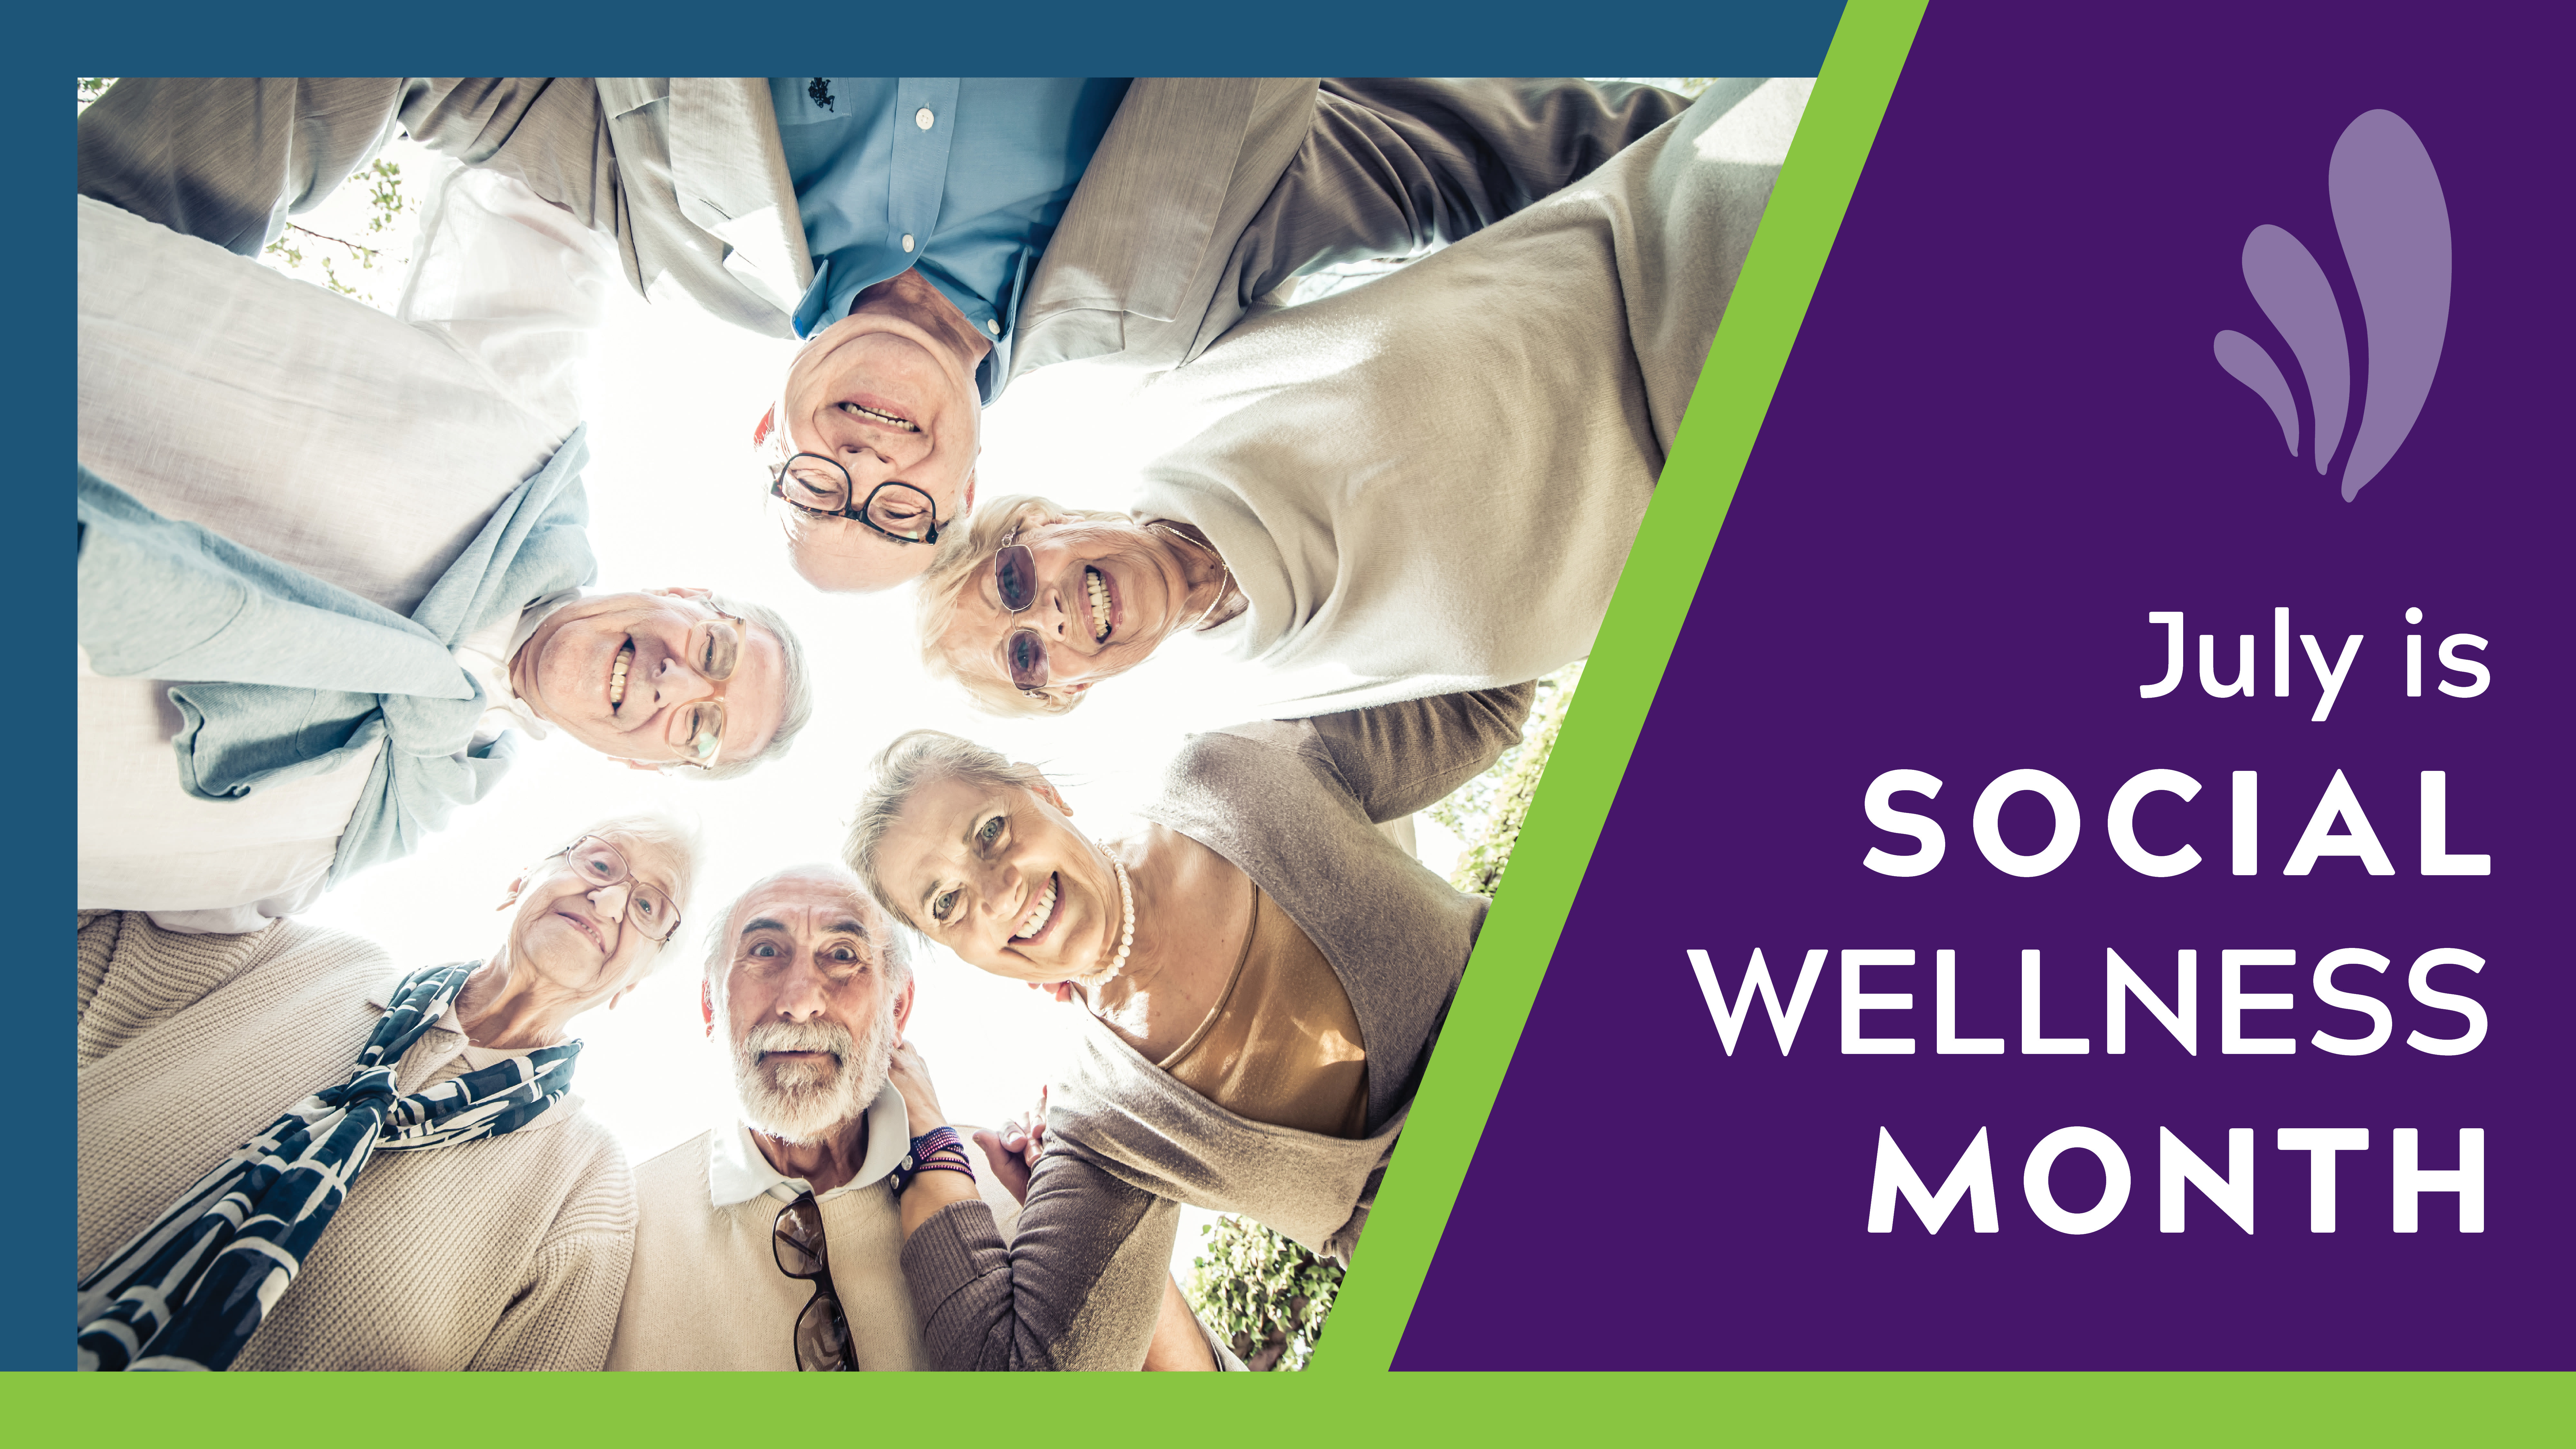 July is Social Wellness Month